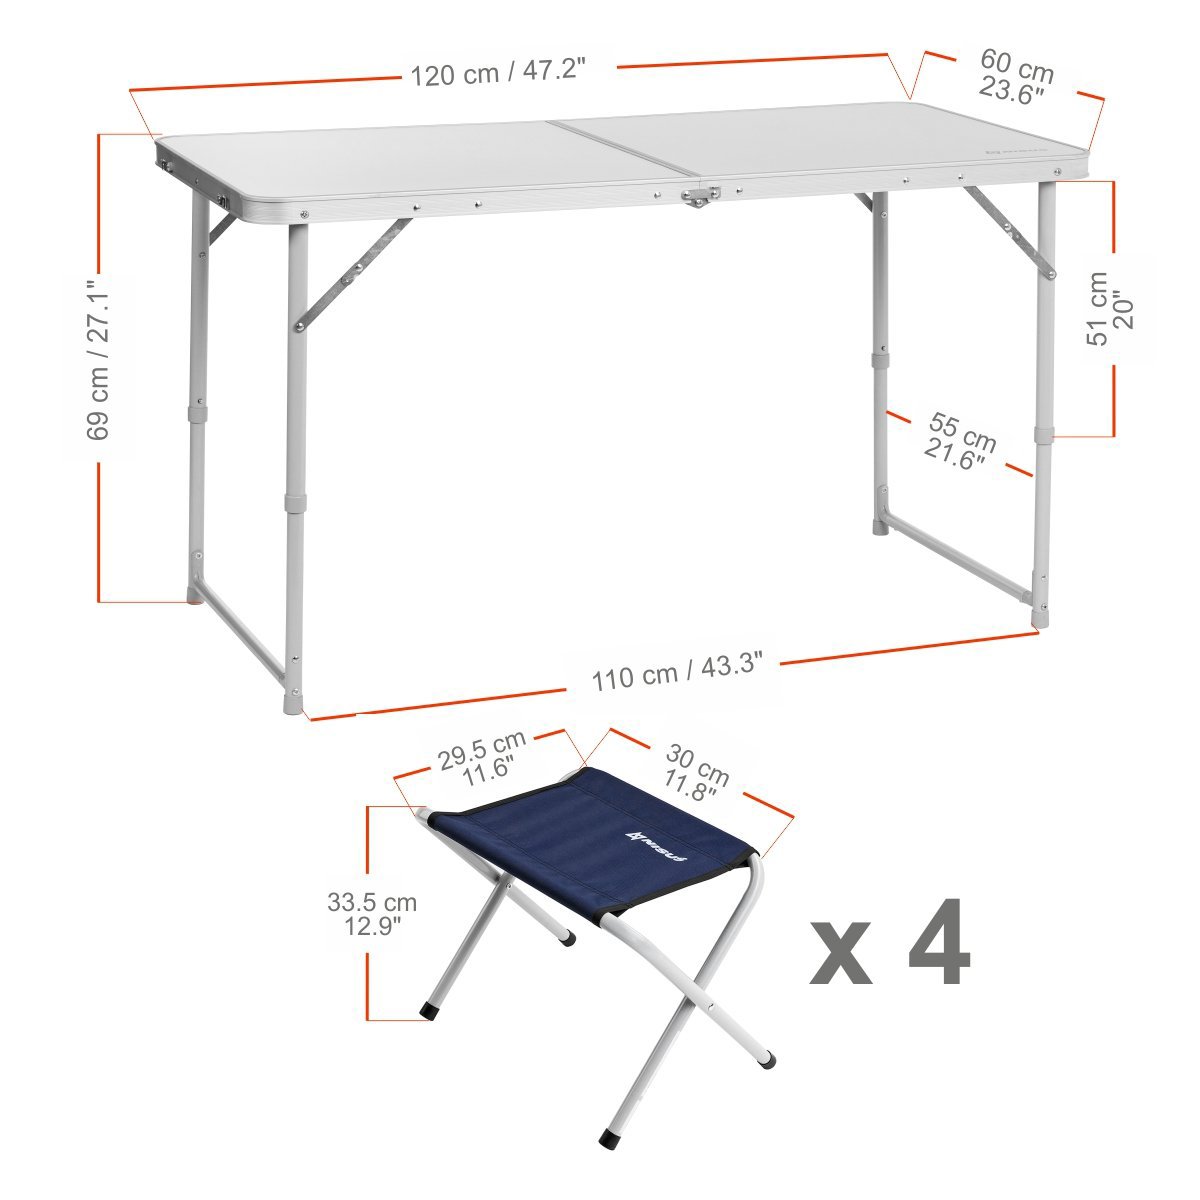 Outdoor Folding Furniture Set consists of four chairs 13*11.5*11.8 inches, and a dining table, which is 47.2*27.1*23.6 inches